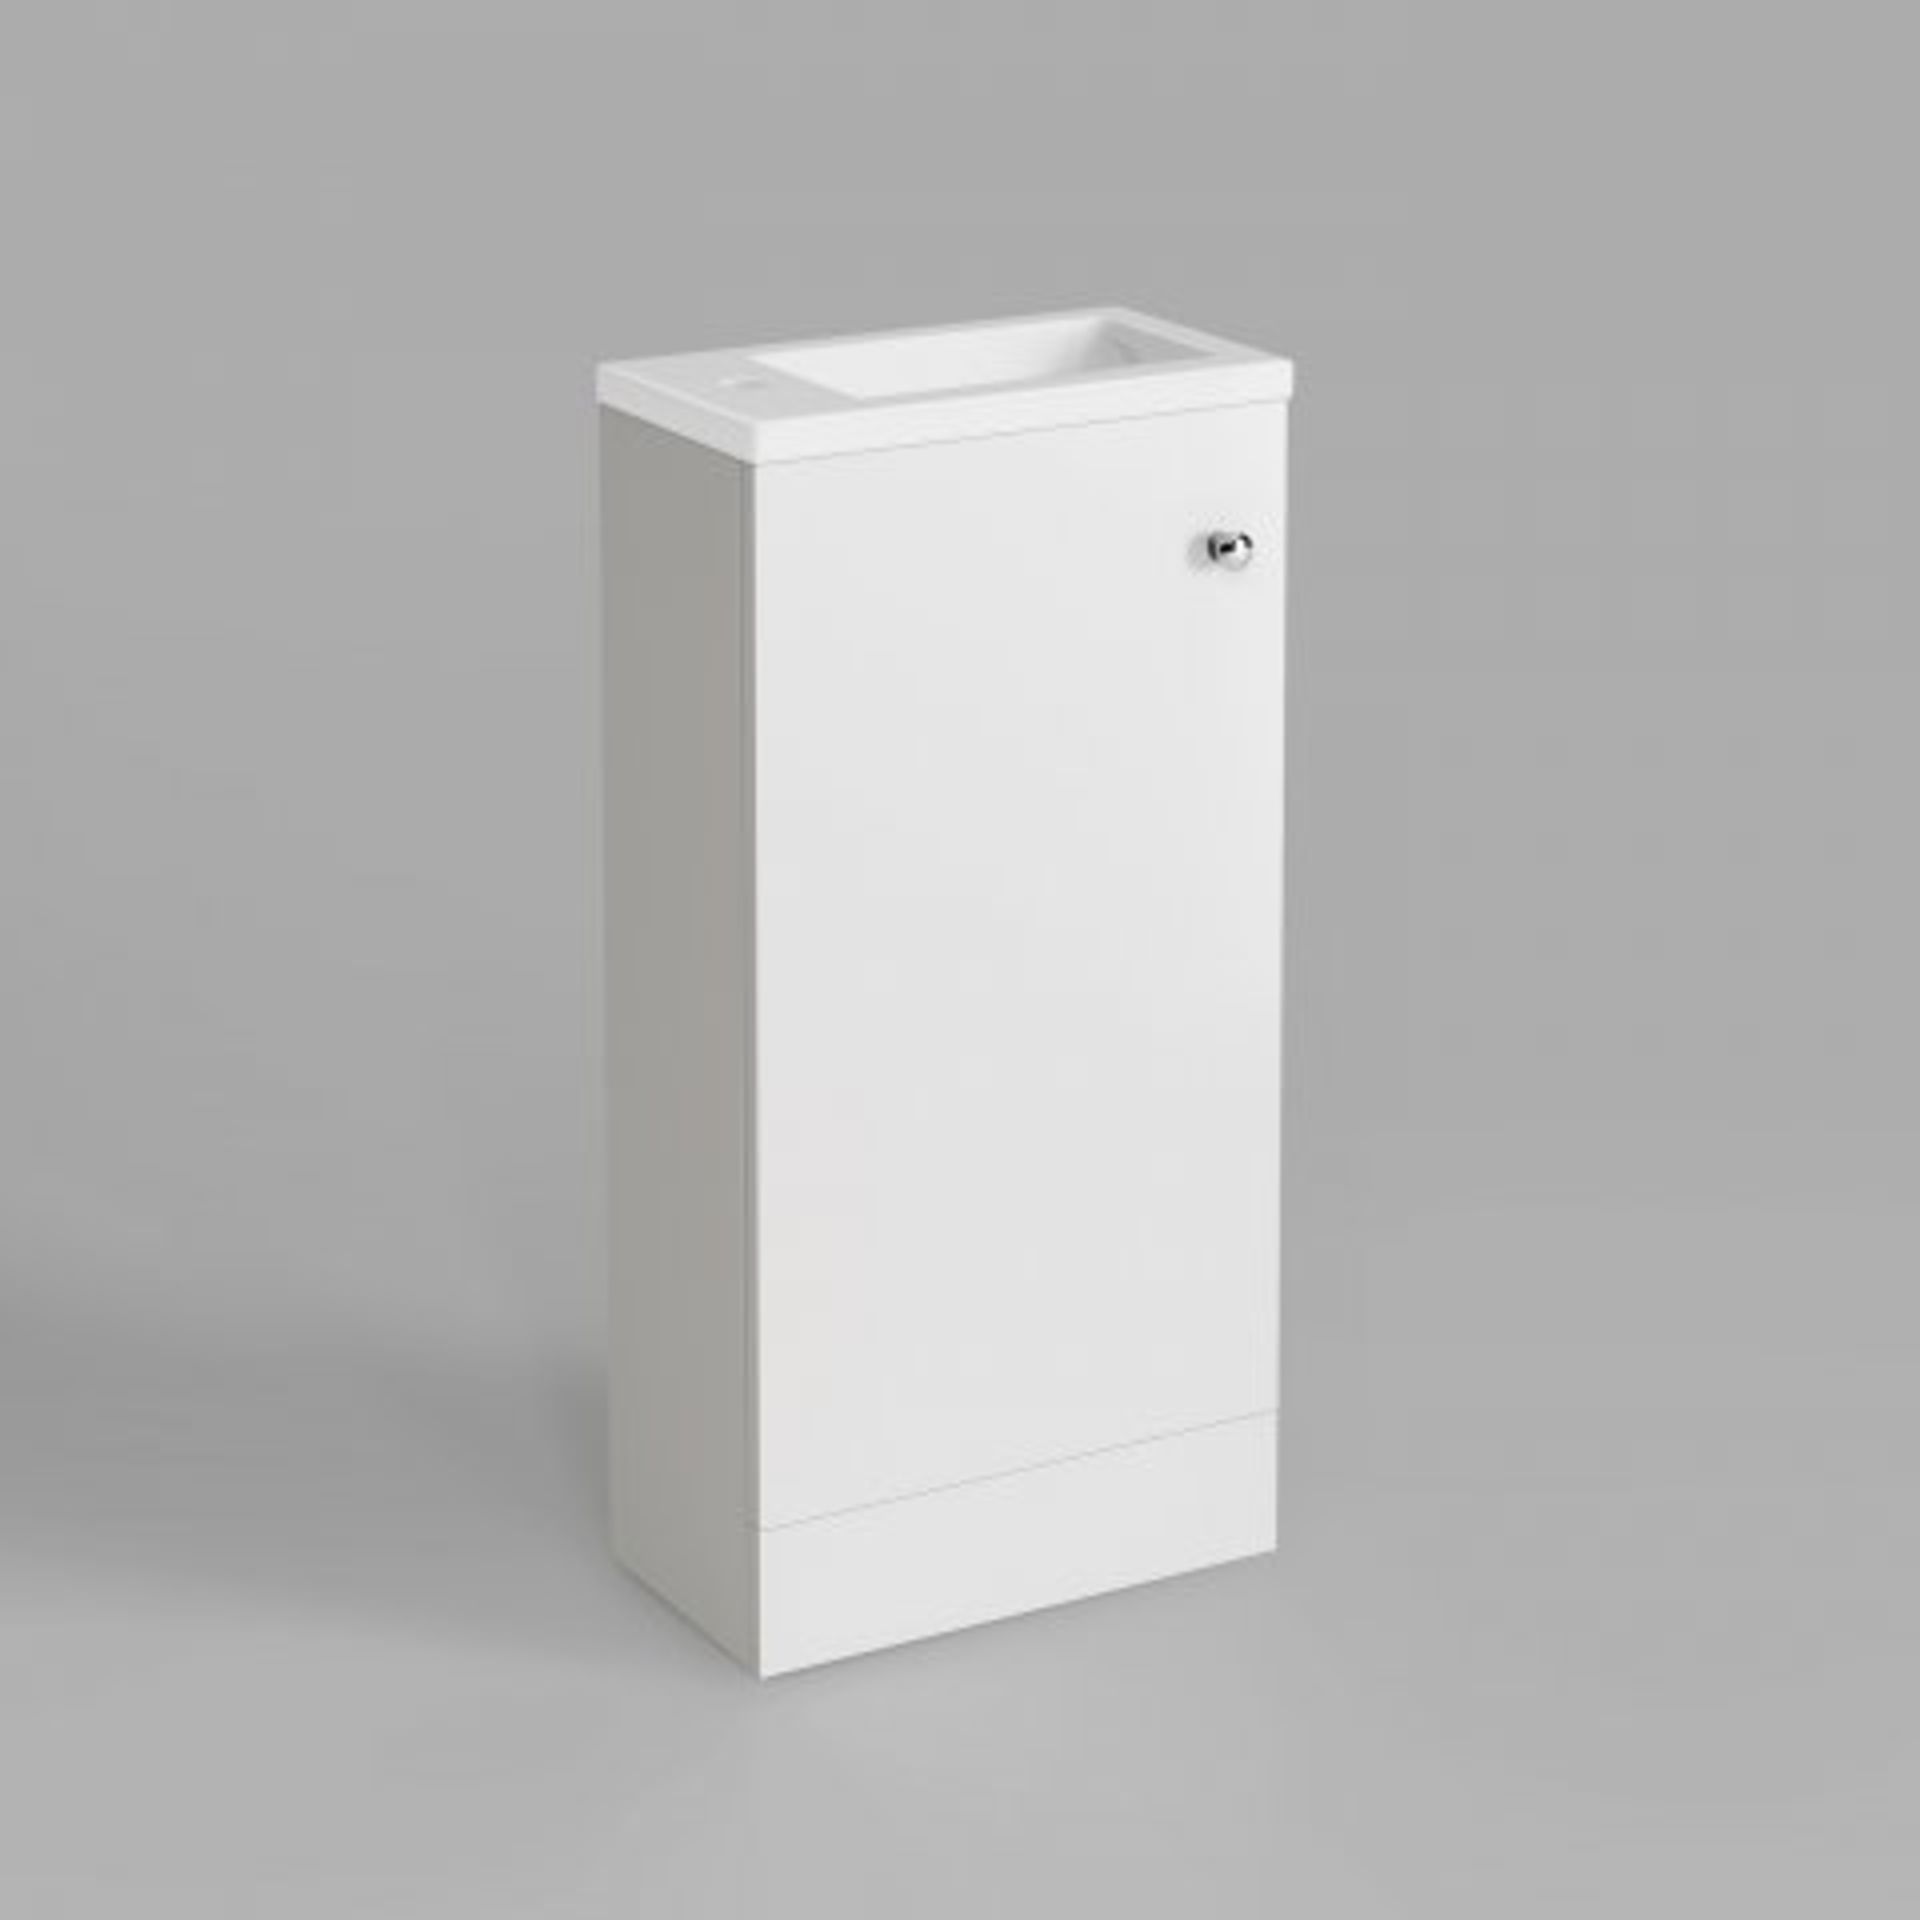 (K183) 400mm Blanc Matte White Basin Unit - Floor Standing. RRP £199.99. With its contemporary, - Image 3 of 4